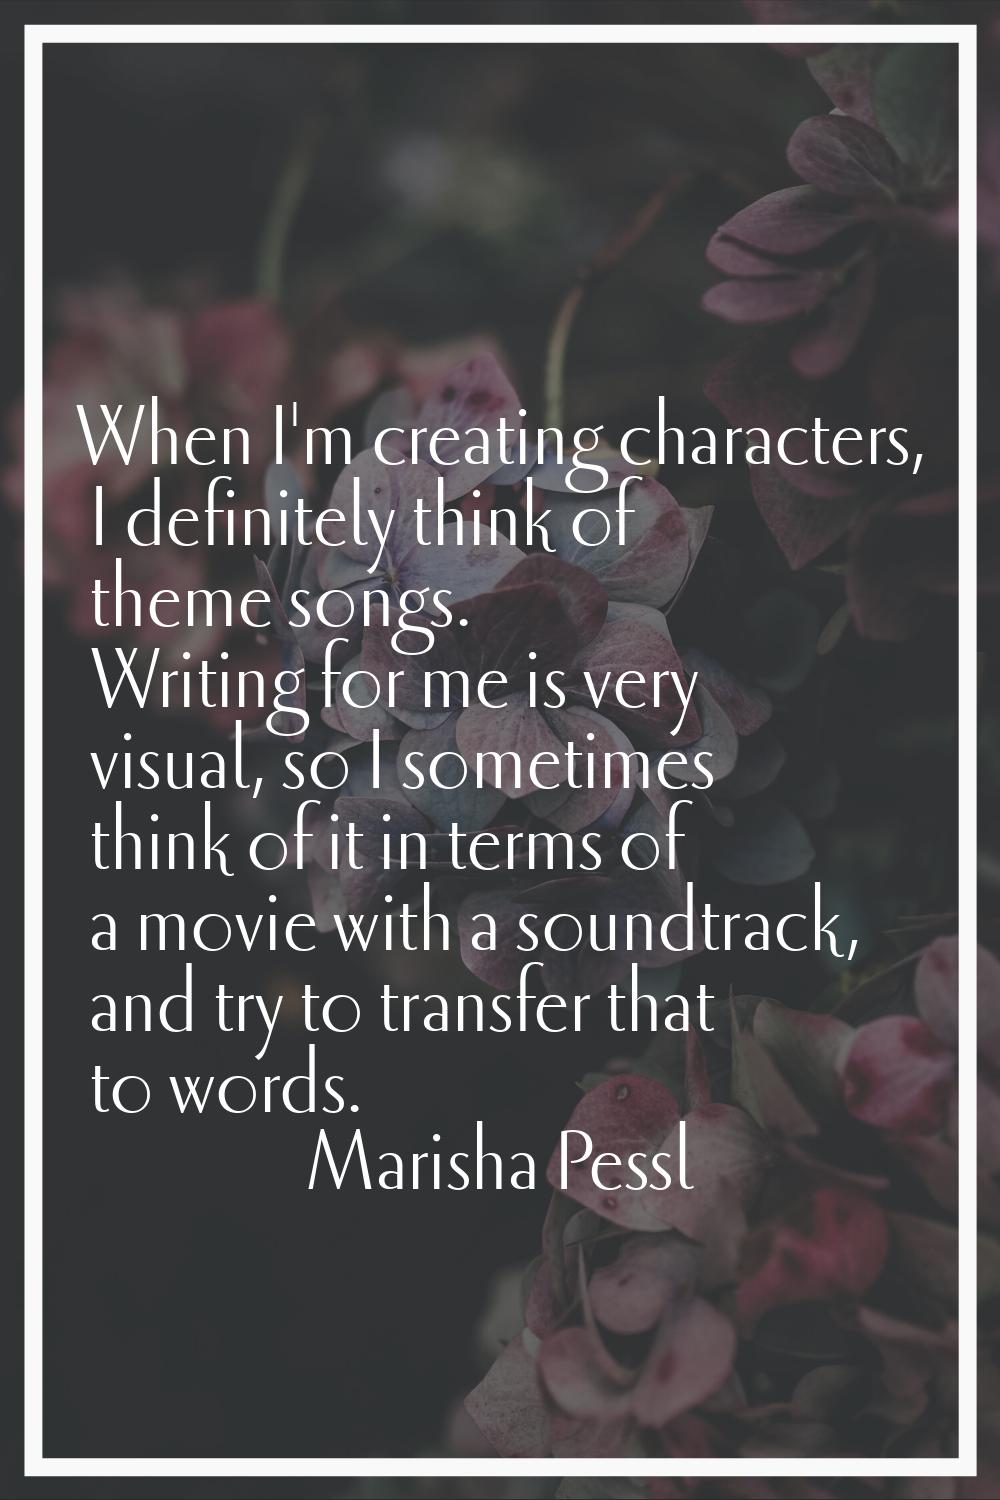 When I'm creating characters, I definitely think of theme songs. Writing for me is very visual, so 